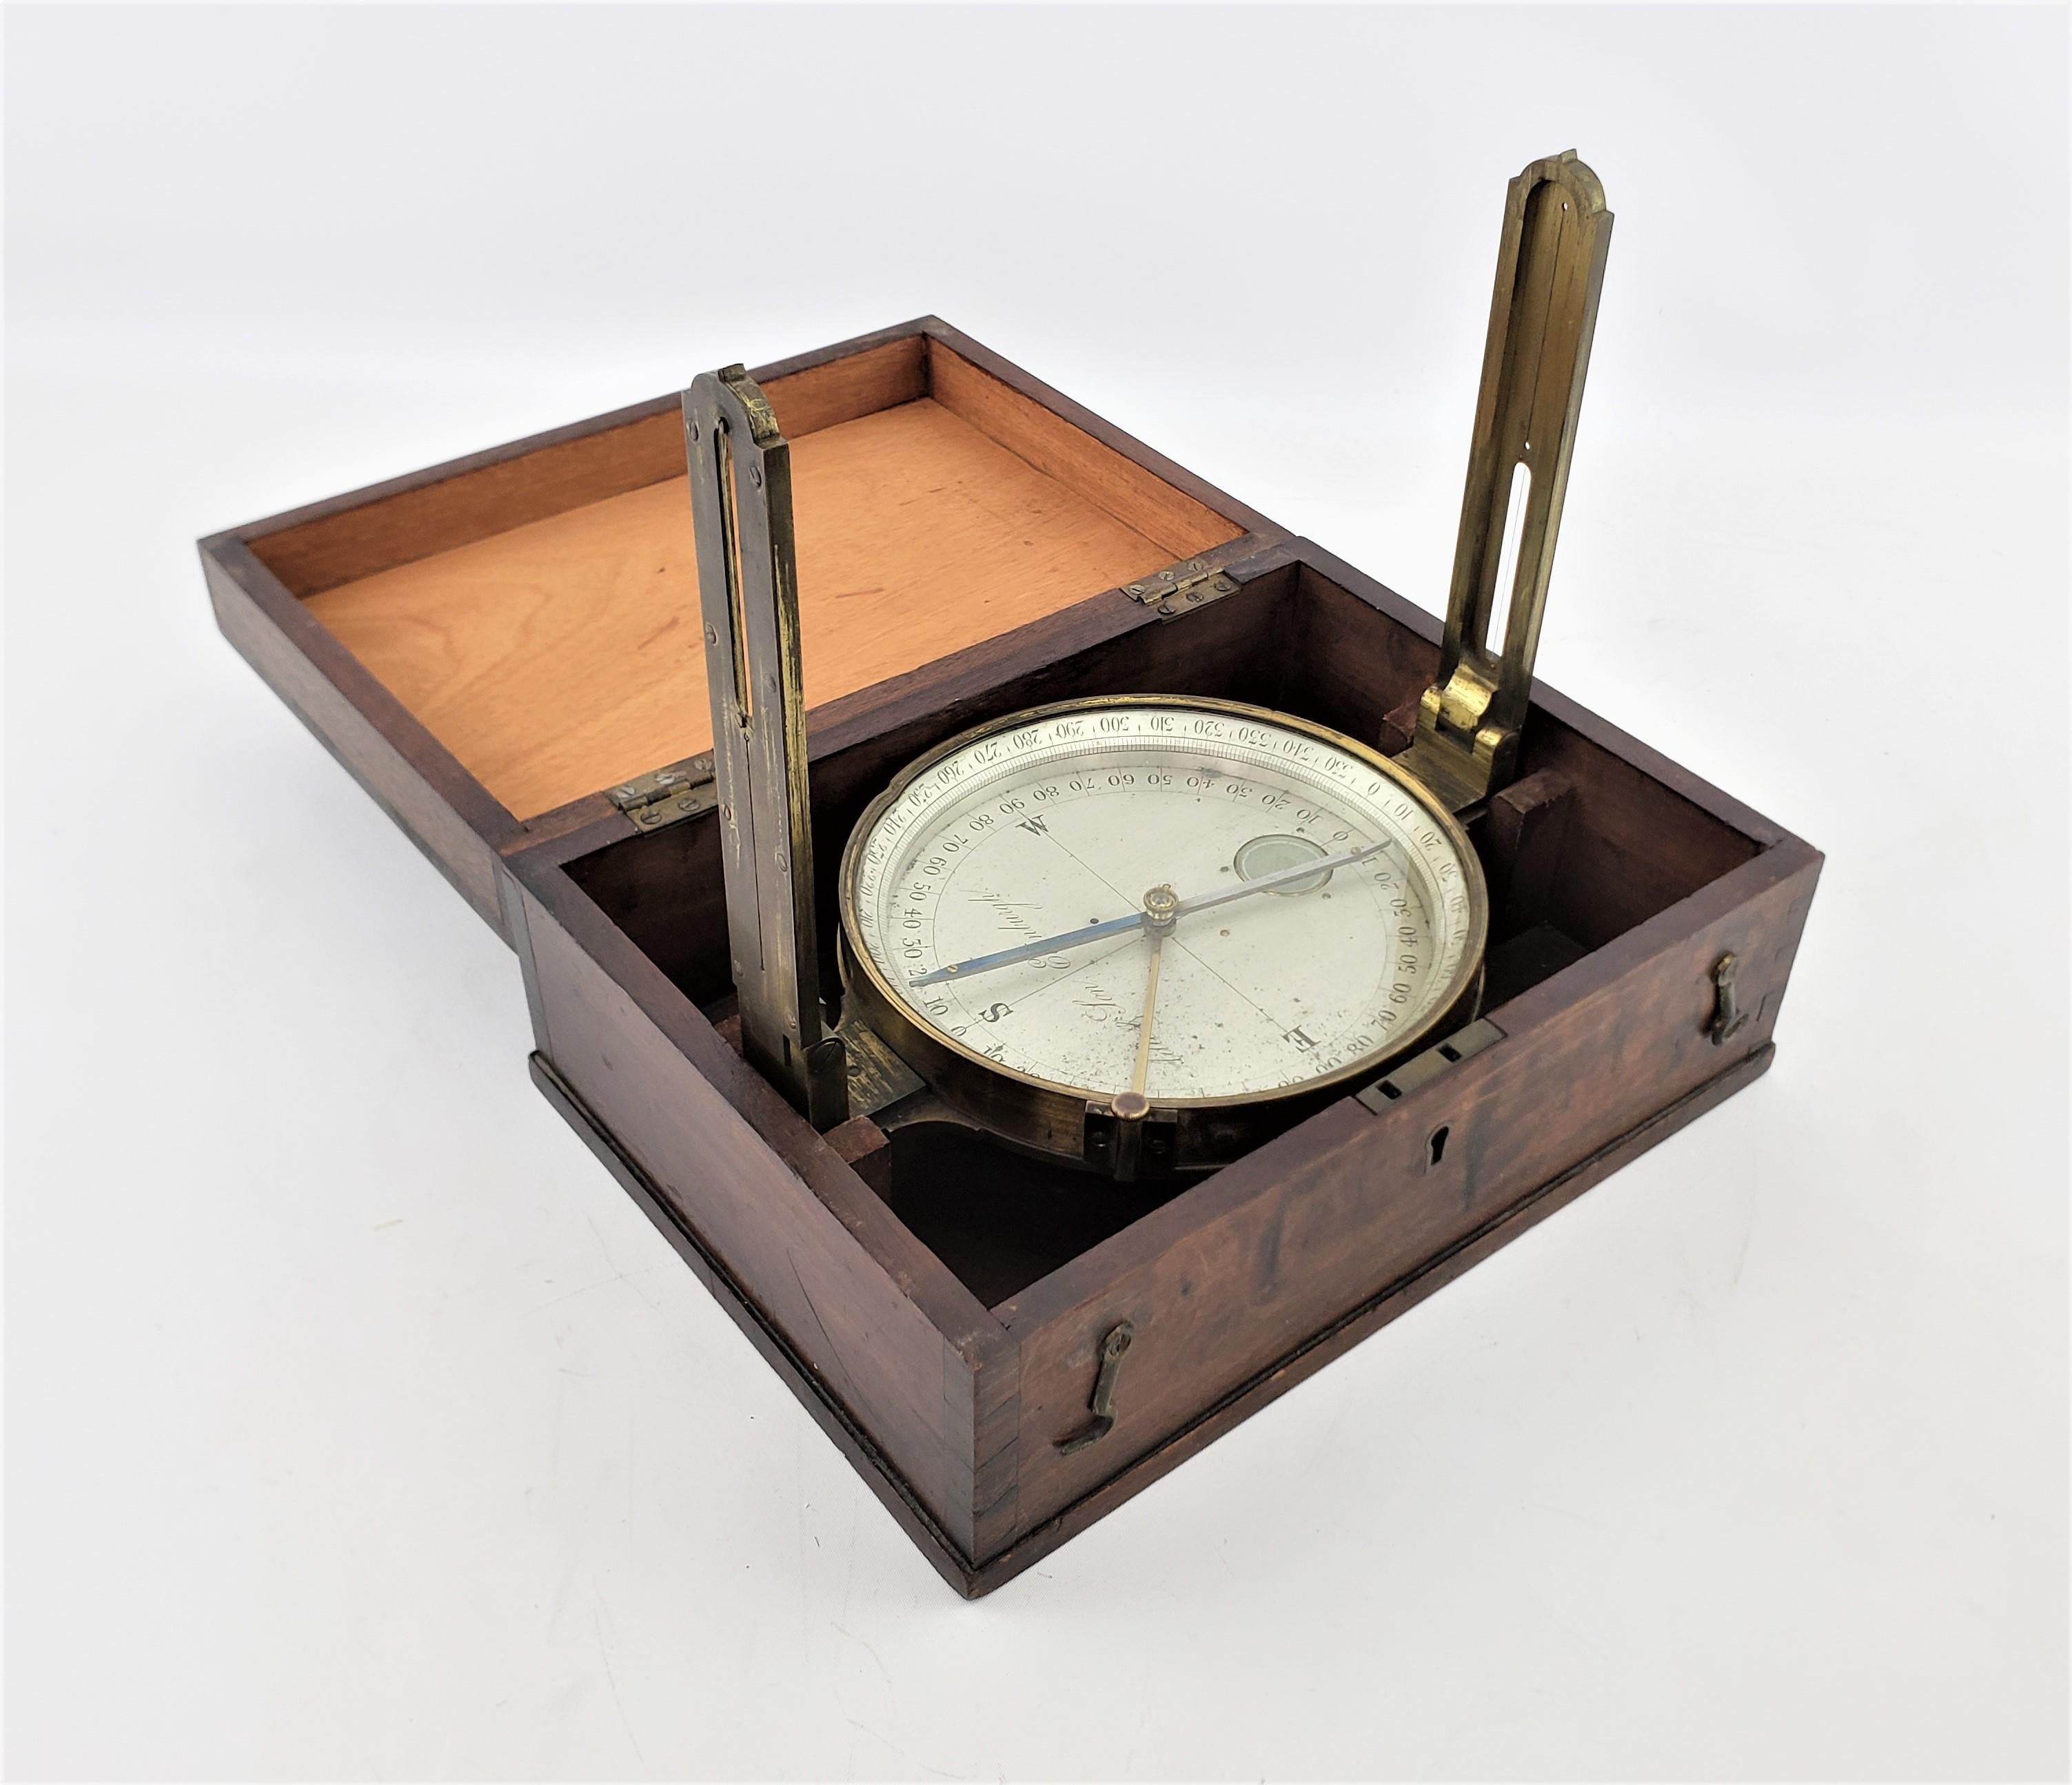 This antique surveyor's compass originates from Scotland and dates to approximately 1880 and made in the period Victorian style. The compass case is composed of solid brass with a metal face and hands. The compass has two hinged hangles that fold